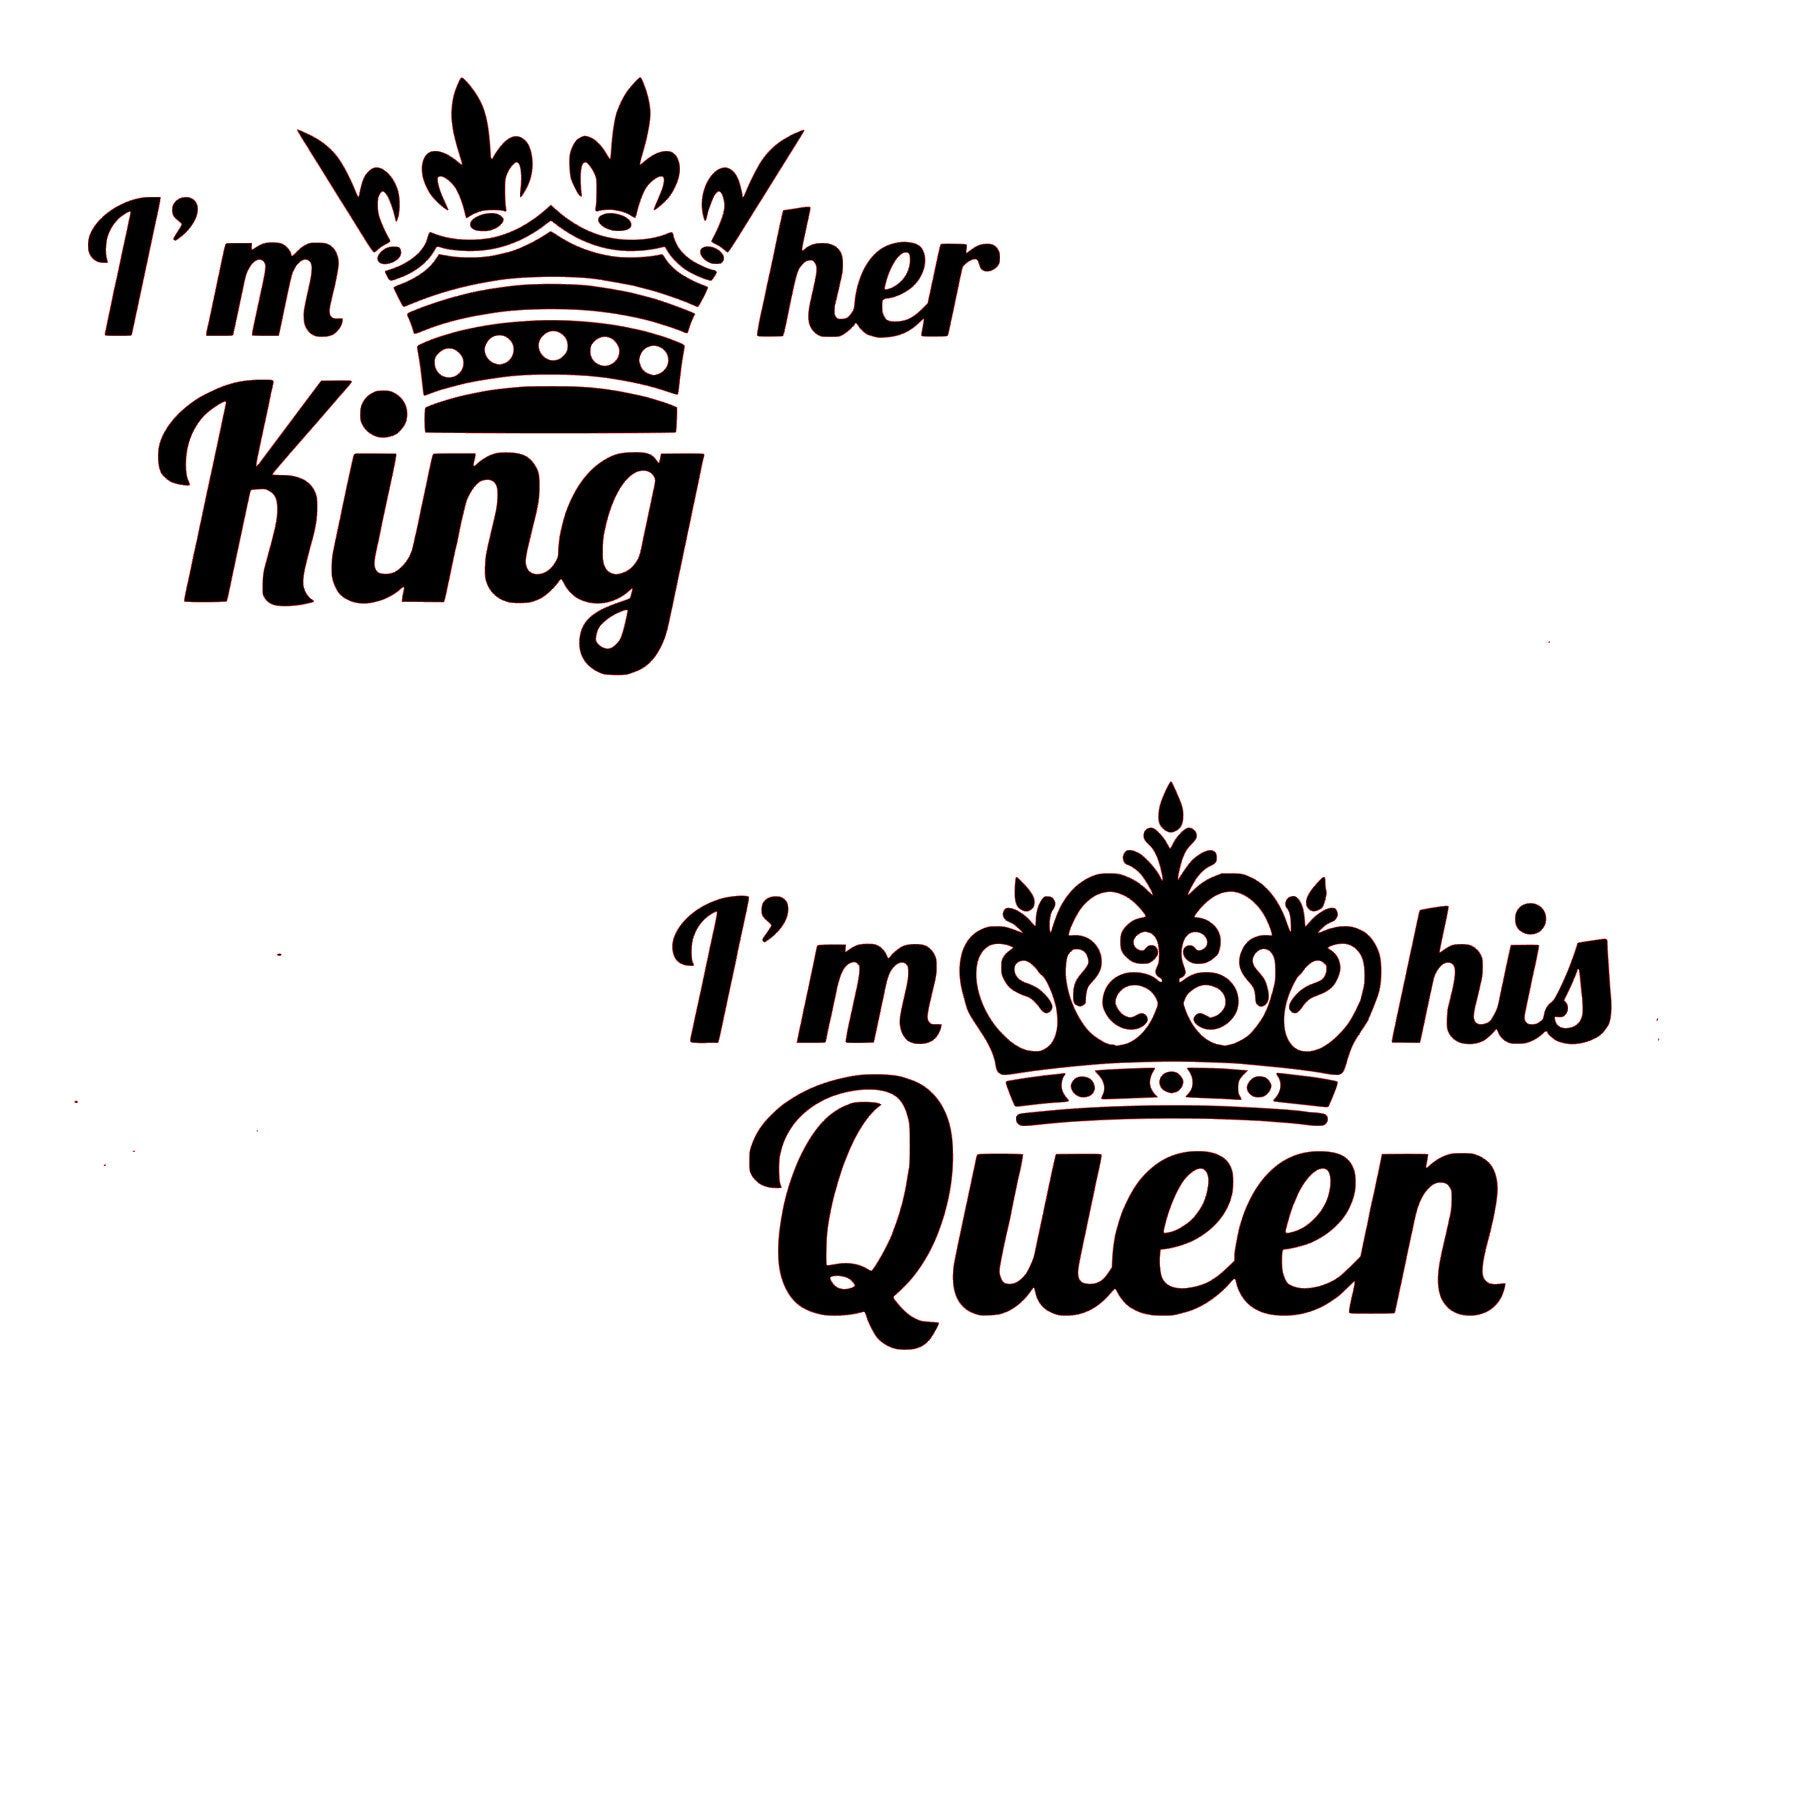 King and Queen Crown Wallpaper Free King and Queen Crown Background